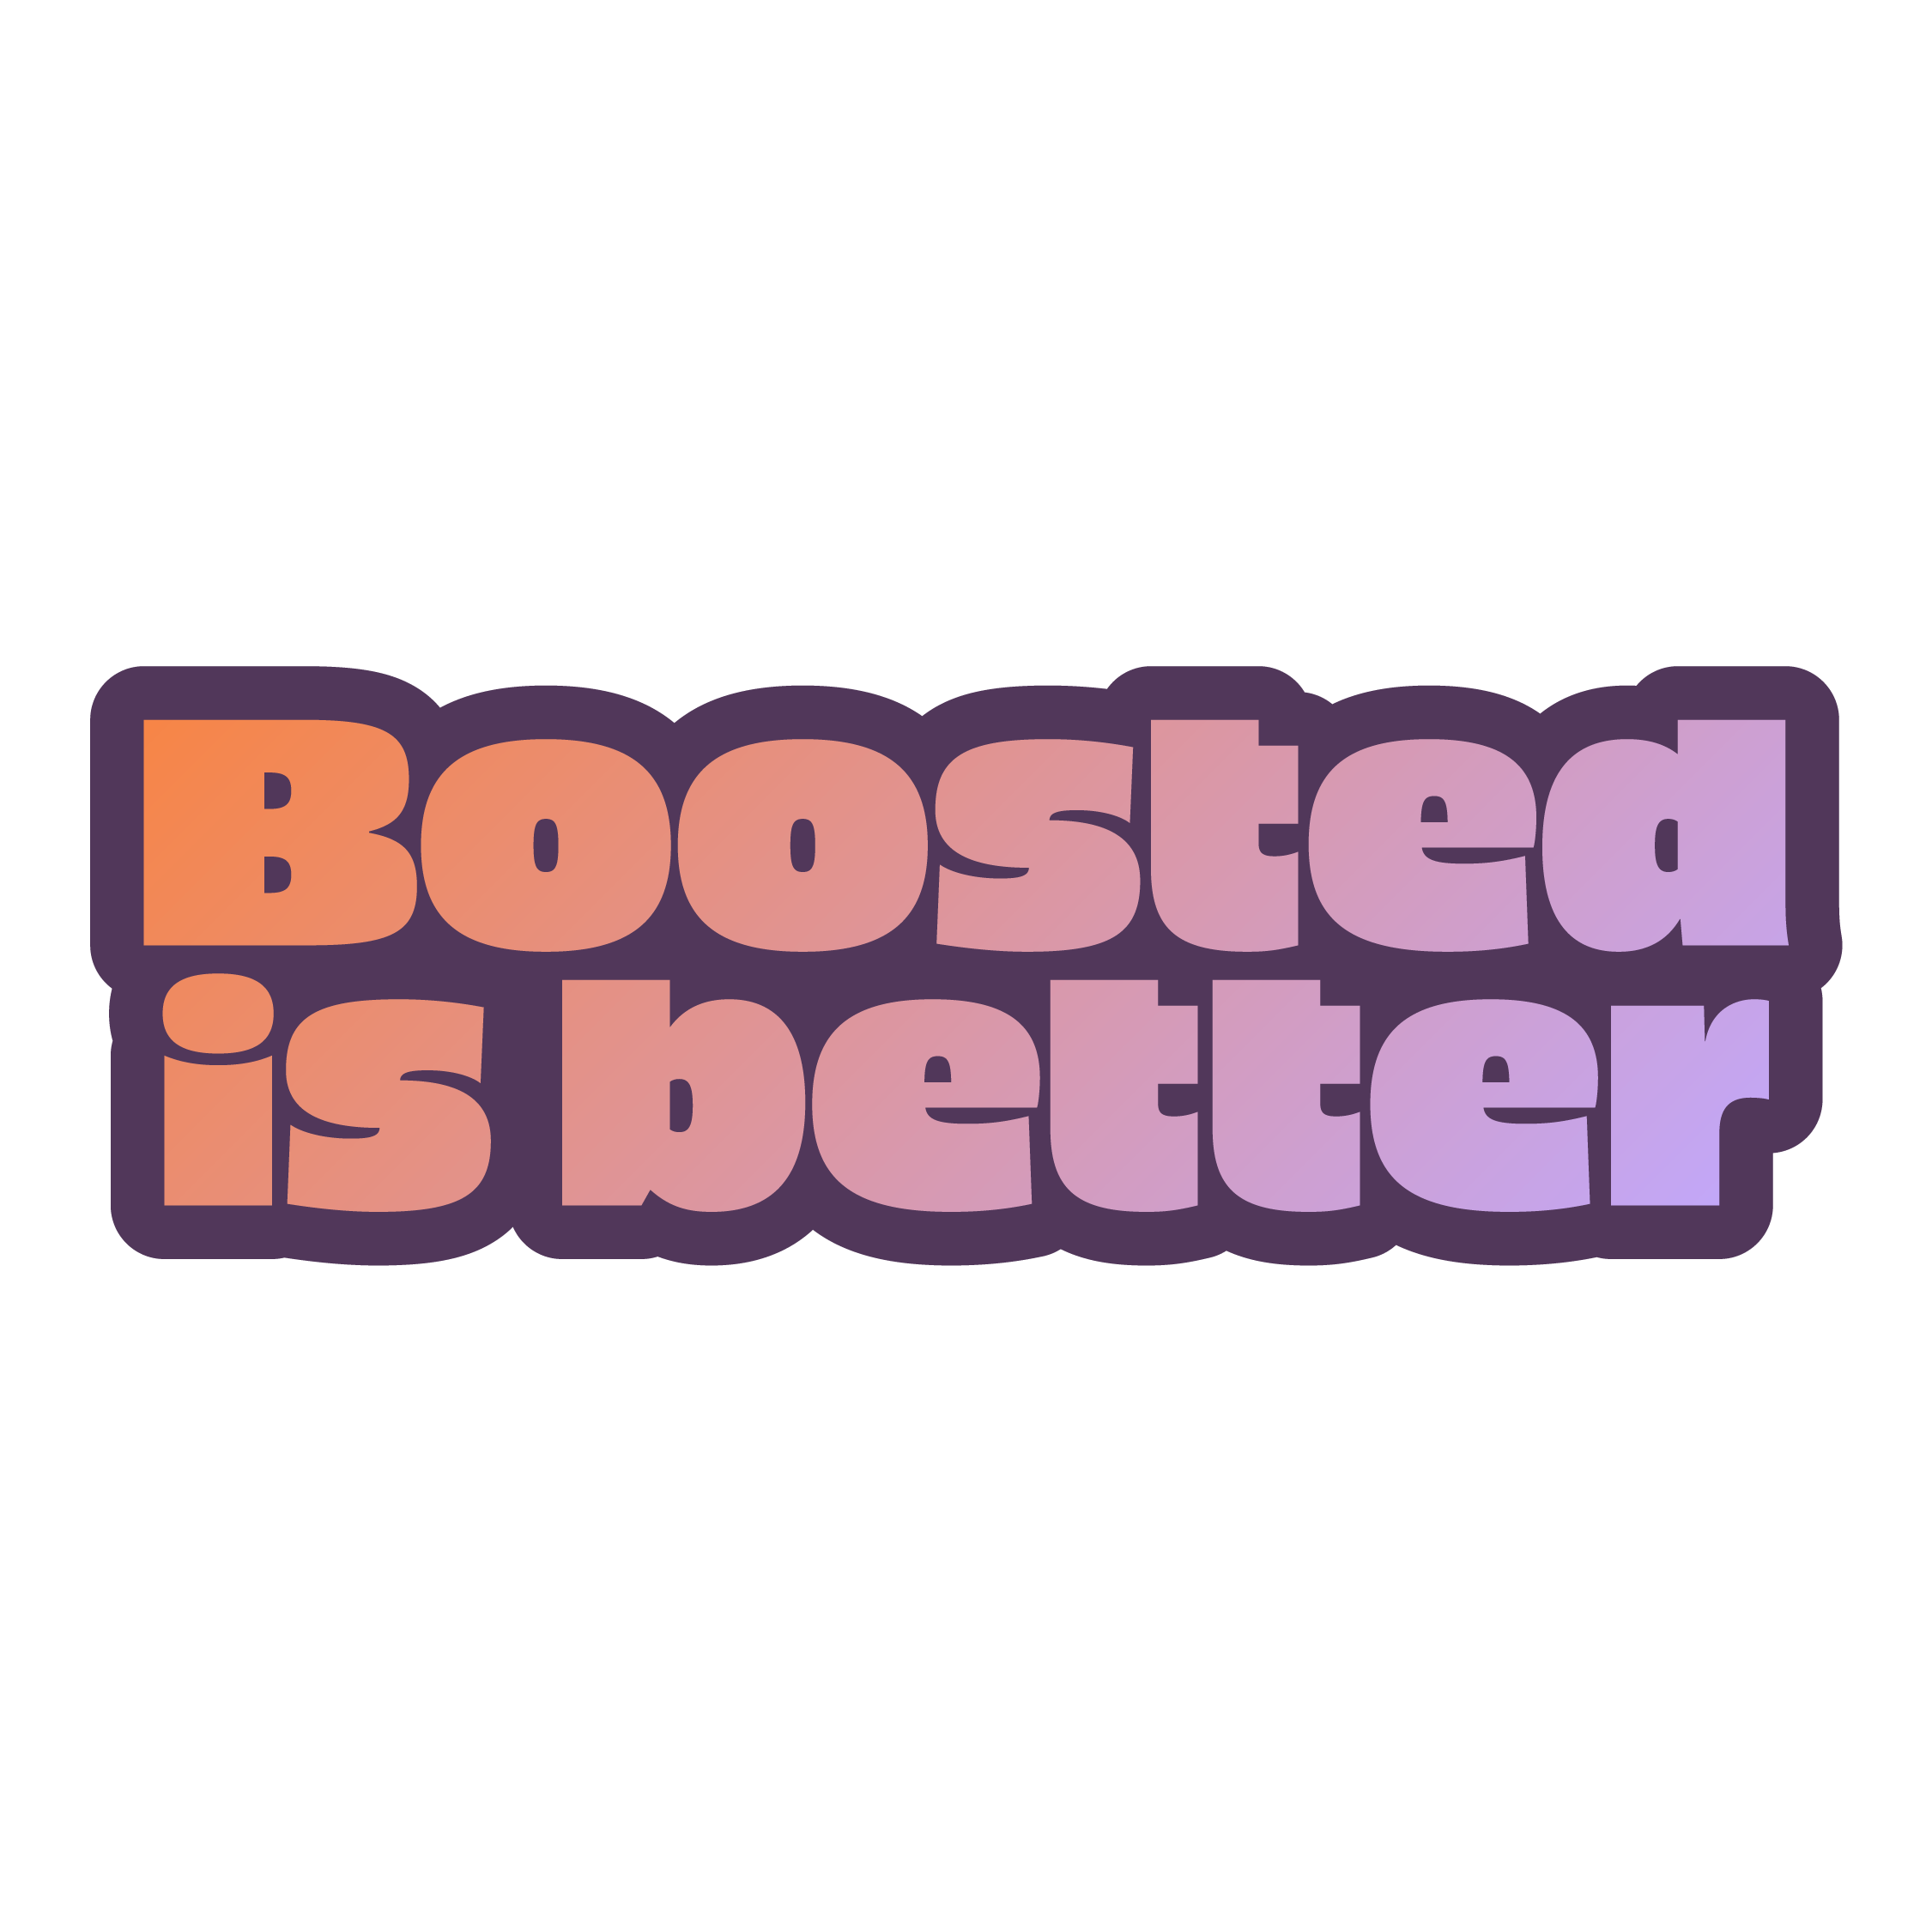 Illustrated lettering that reads "Boosted is better"